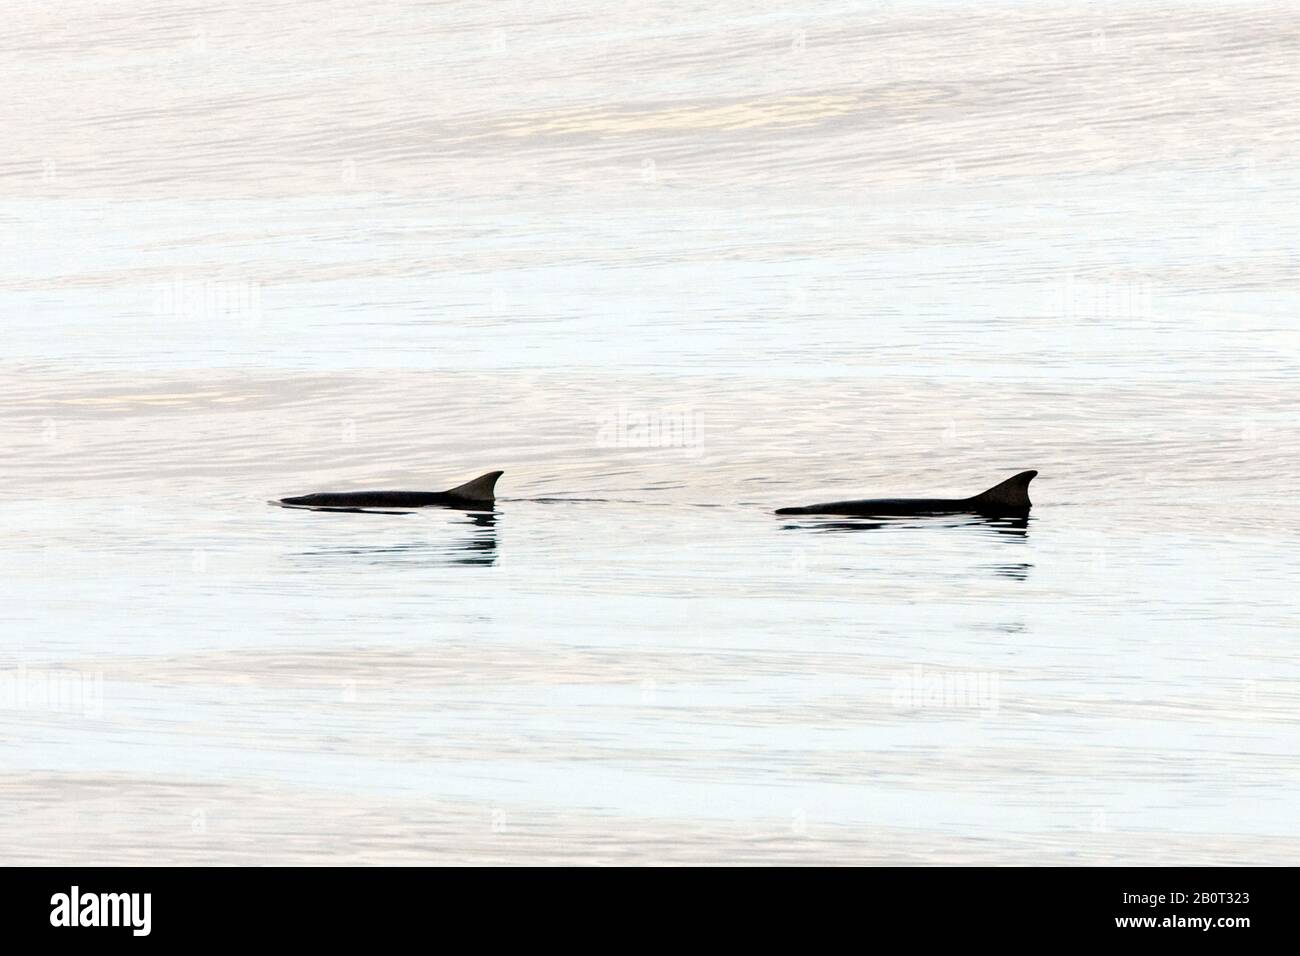 dwarf sperm whale (Kogia simus), two dwarf sperm whales swimming at the water surface, side view, Ascencion Stock Photo